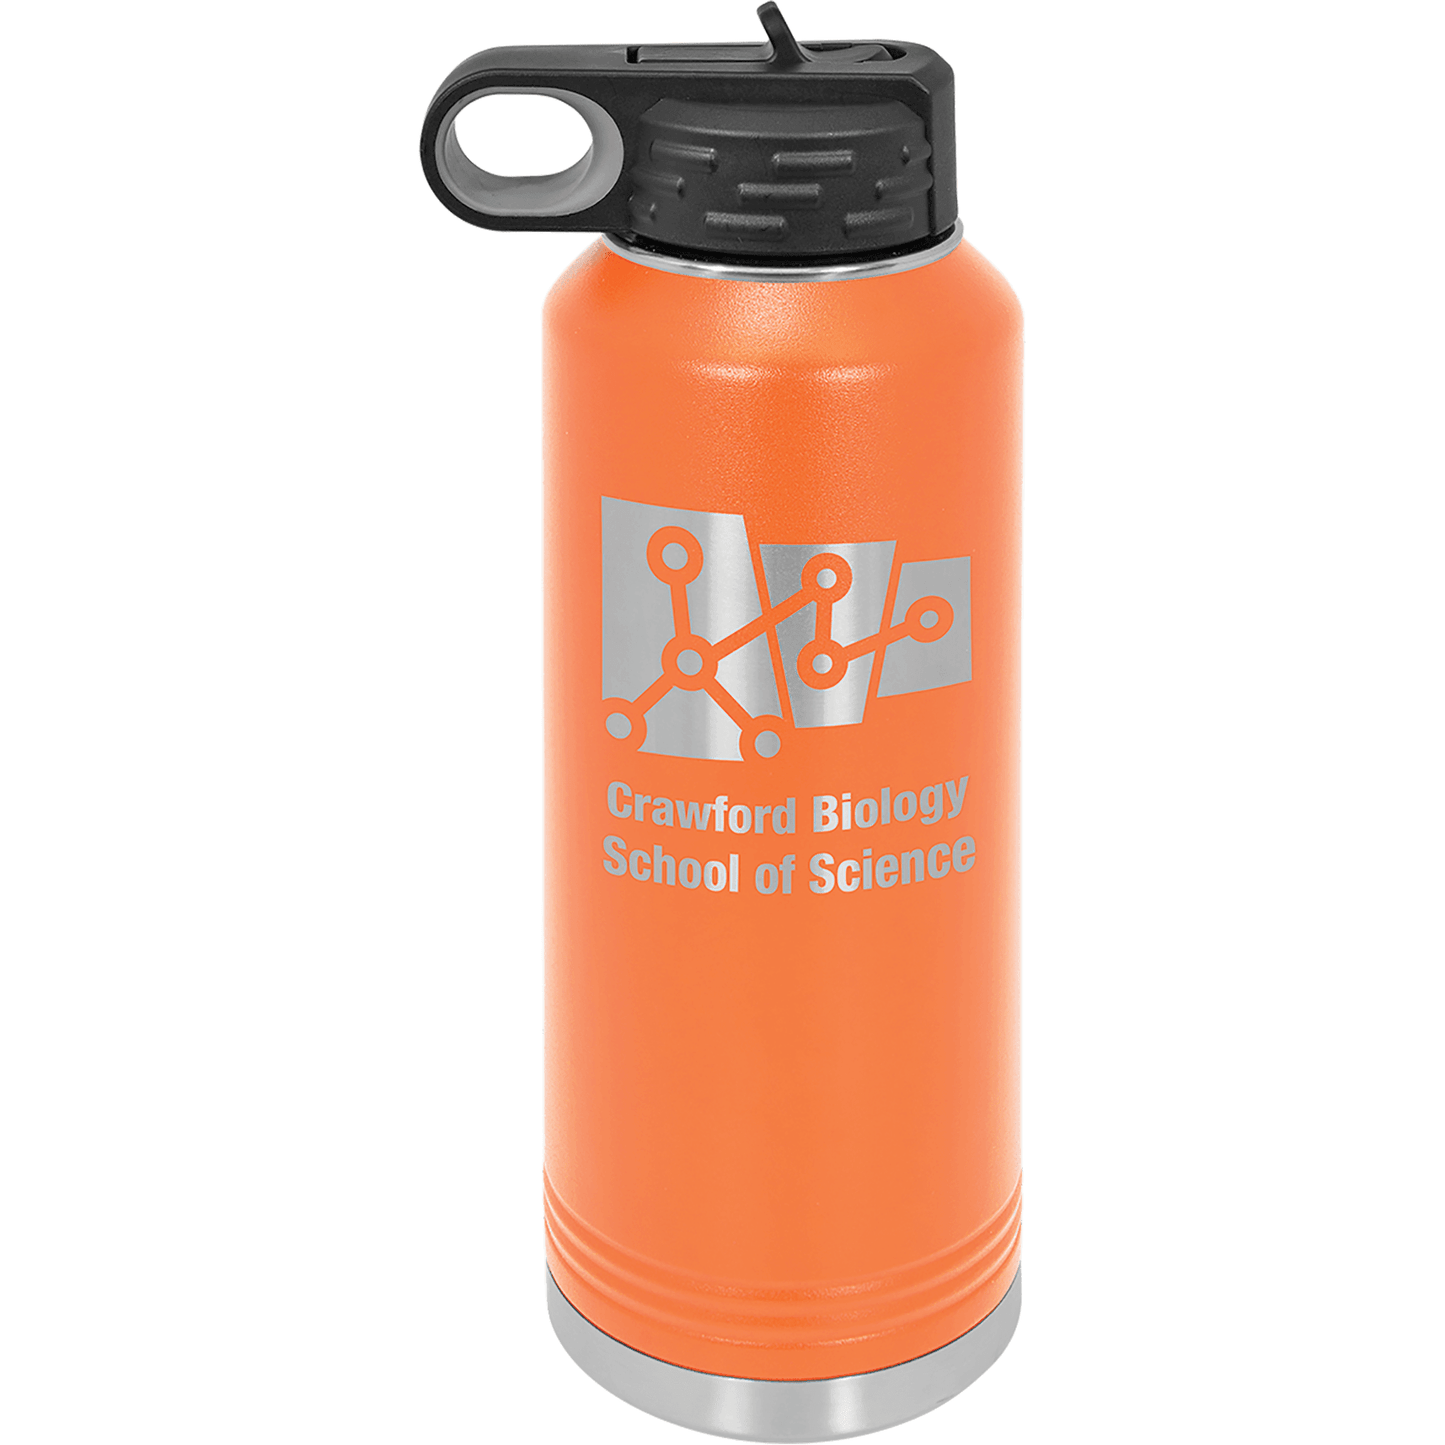 Polar Camel Insulated 40 oz Water Bottle - Customize It - Perfect Etch